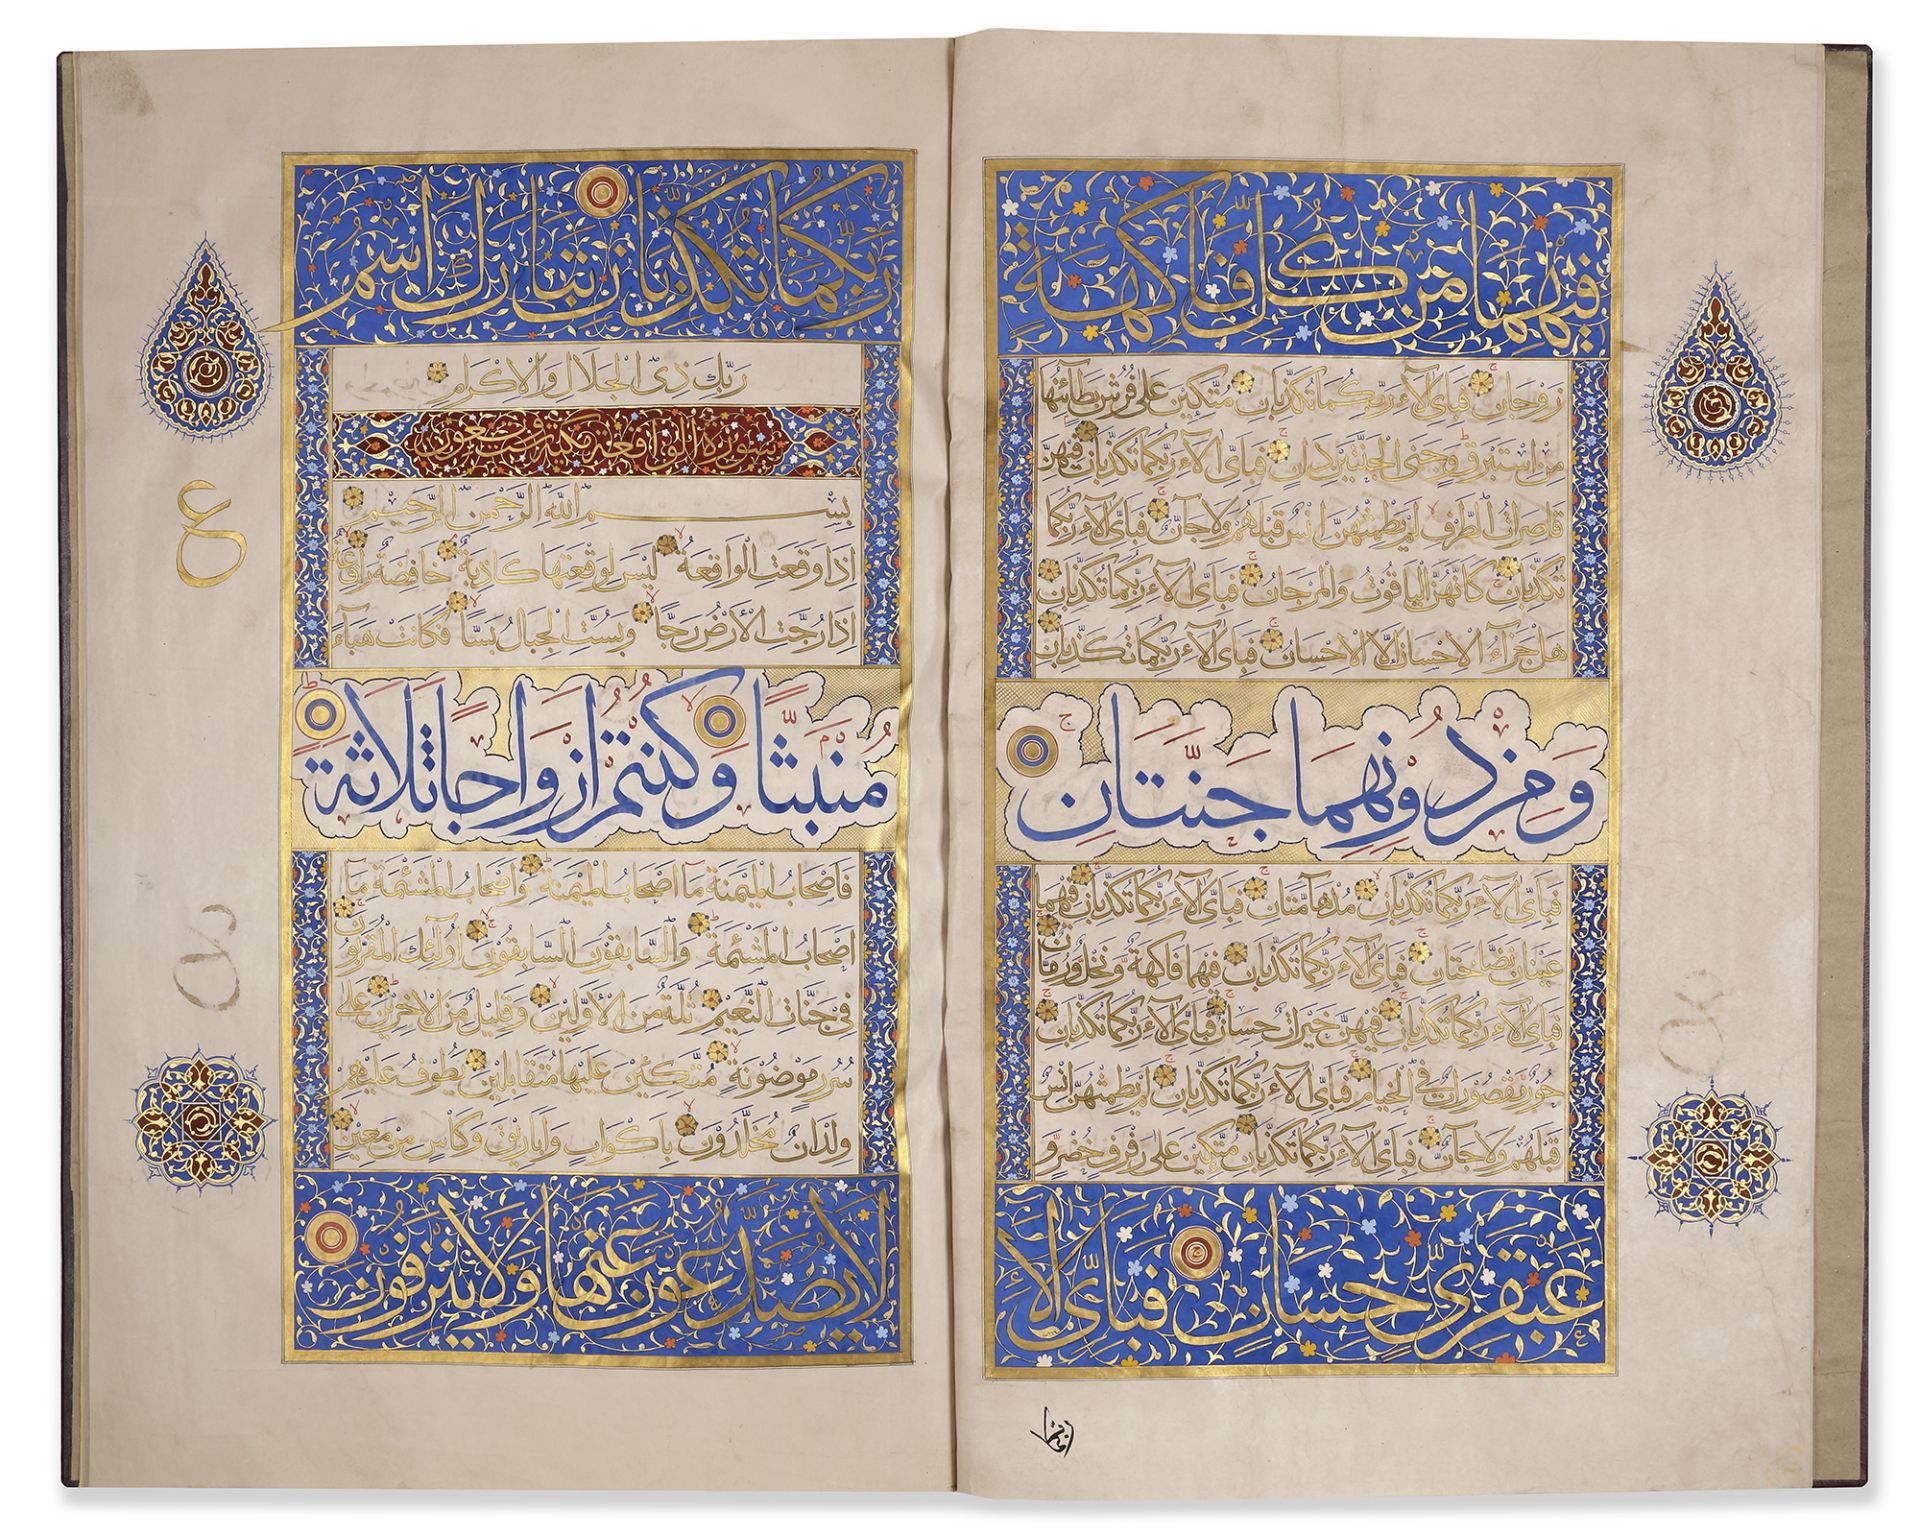 A LARGE ILLUMINATED QURAN JUZ, CENTRAL ASIA, LATE 19TH-EARLY 20TH CENTURY - Bild 4 aus 6